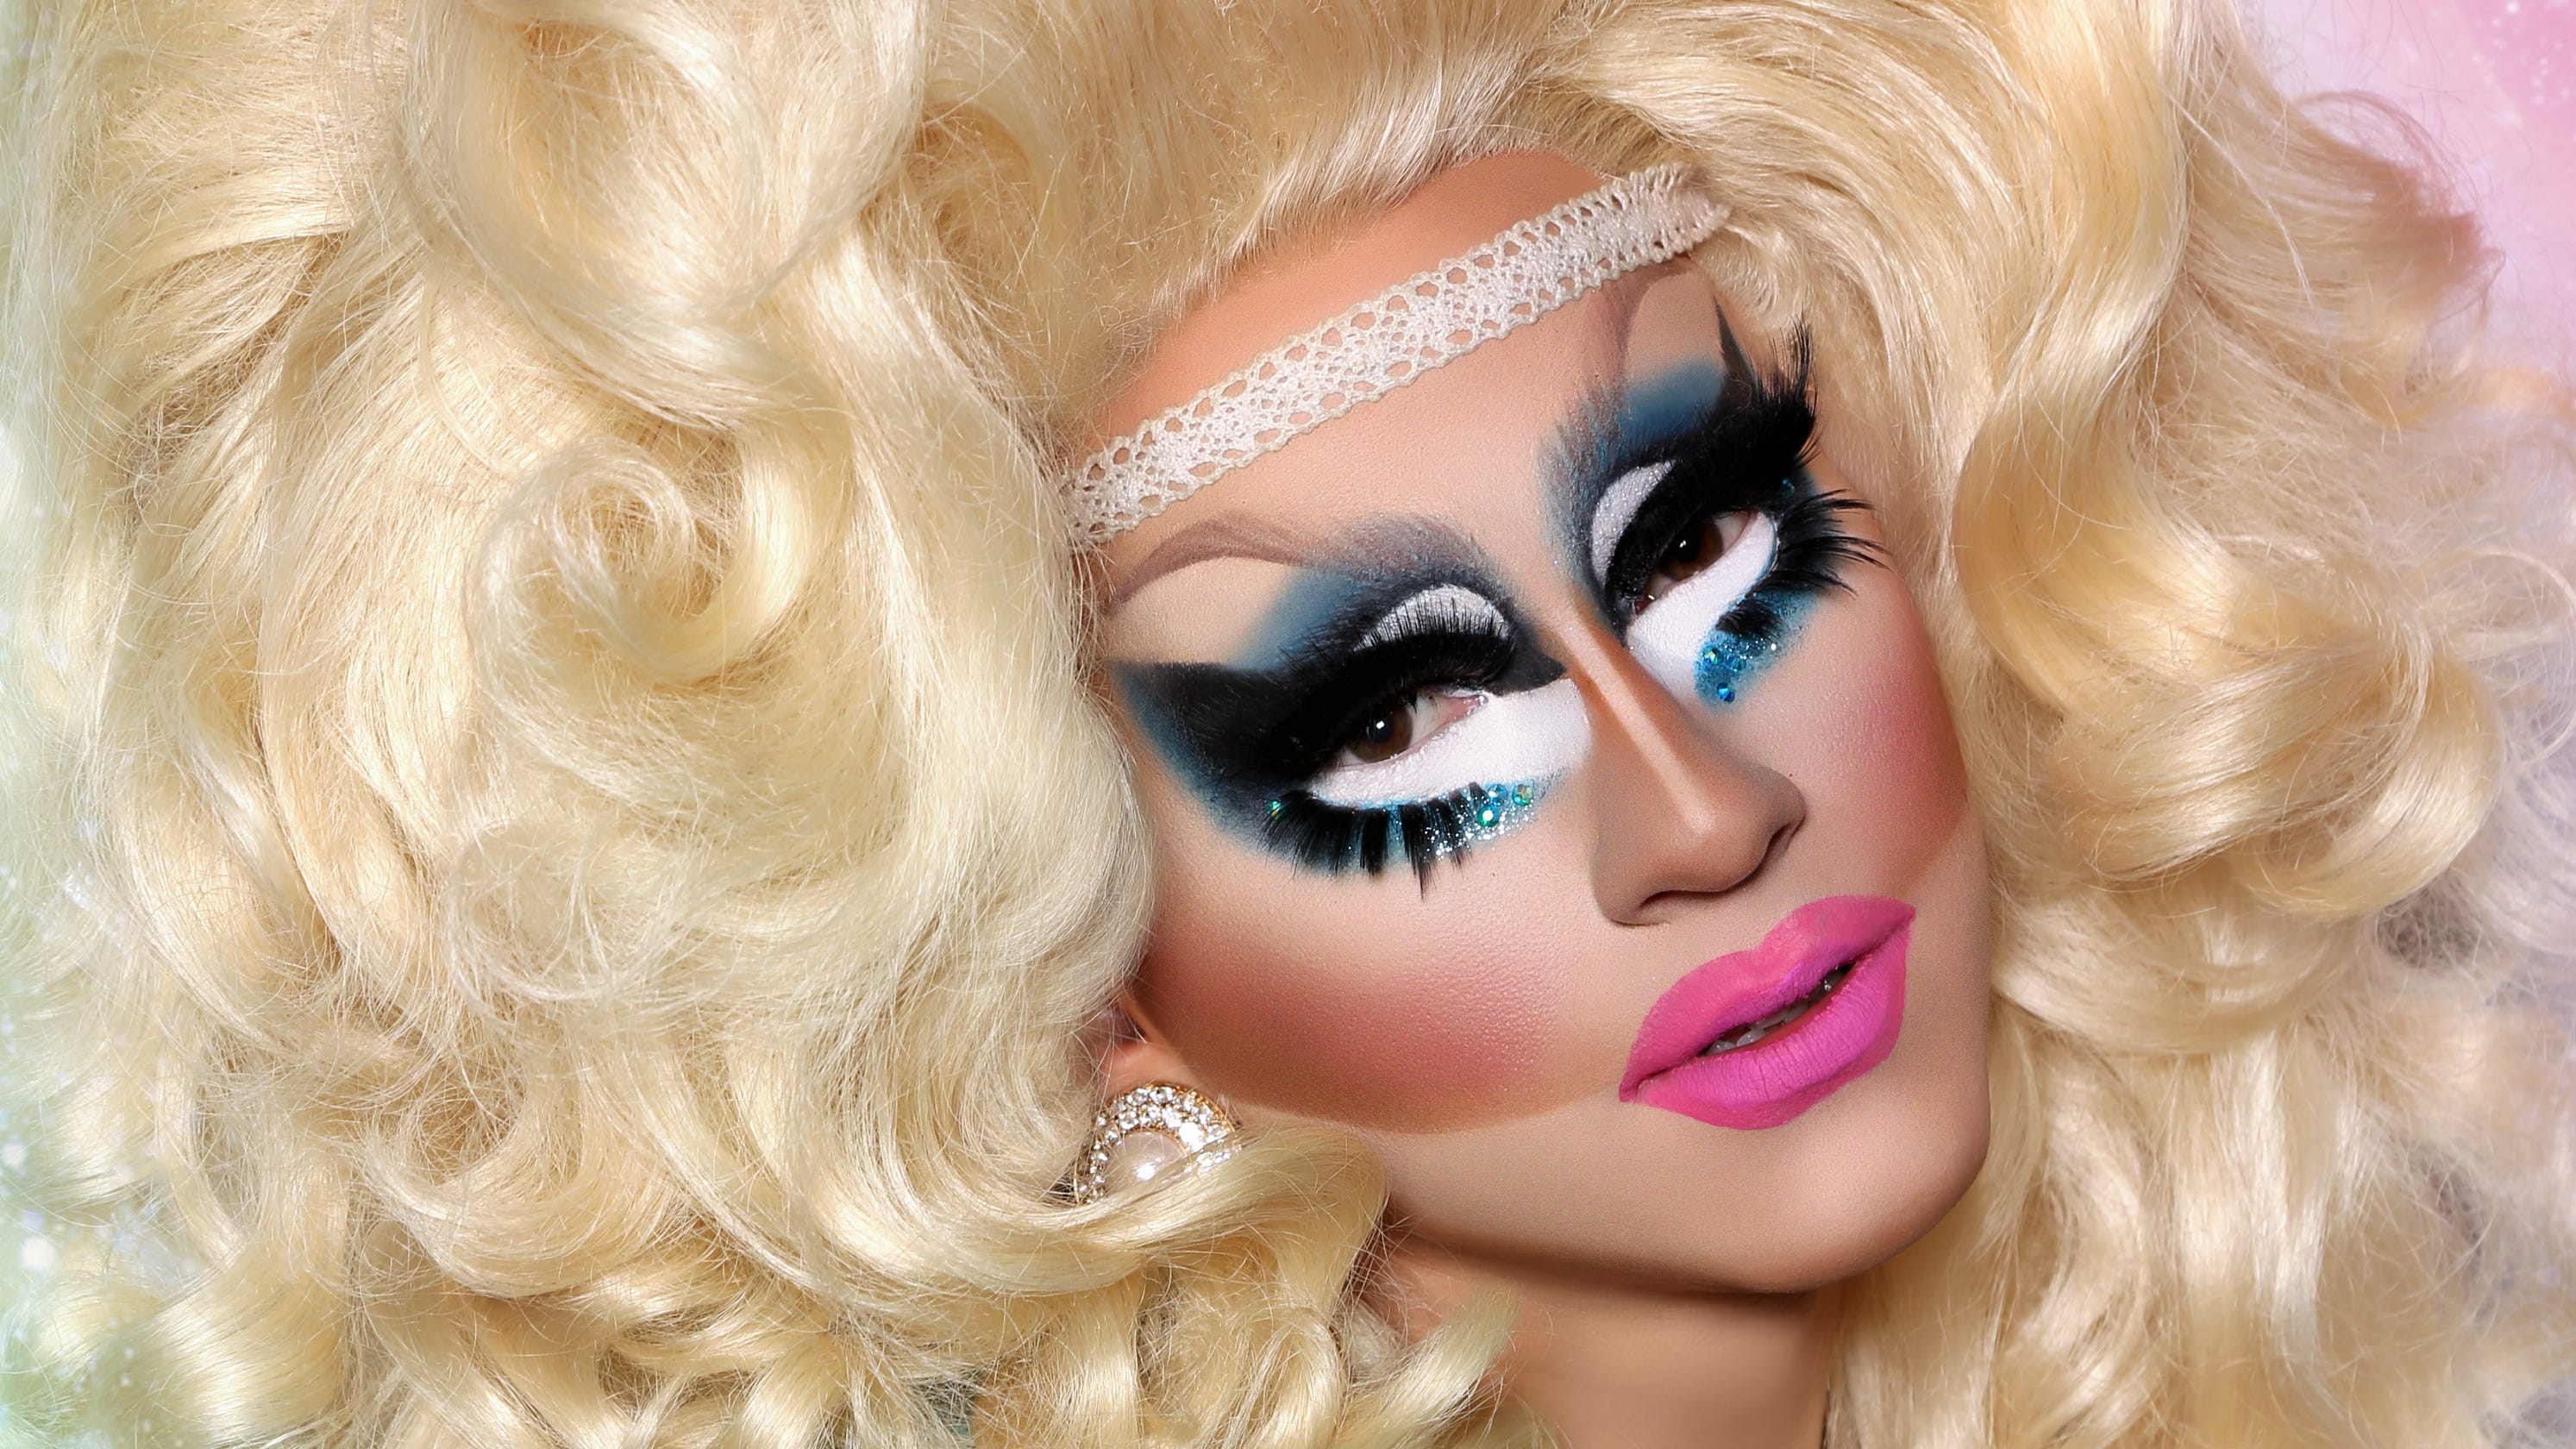 Why 2019 was the year of Trixie Mattel